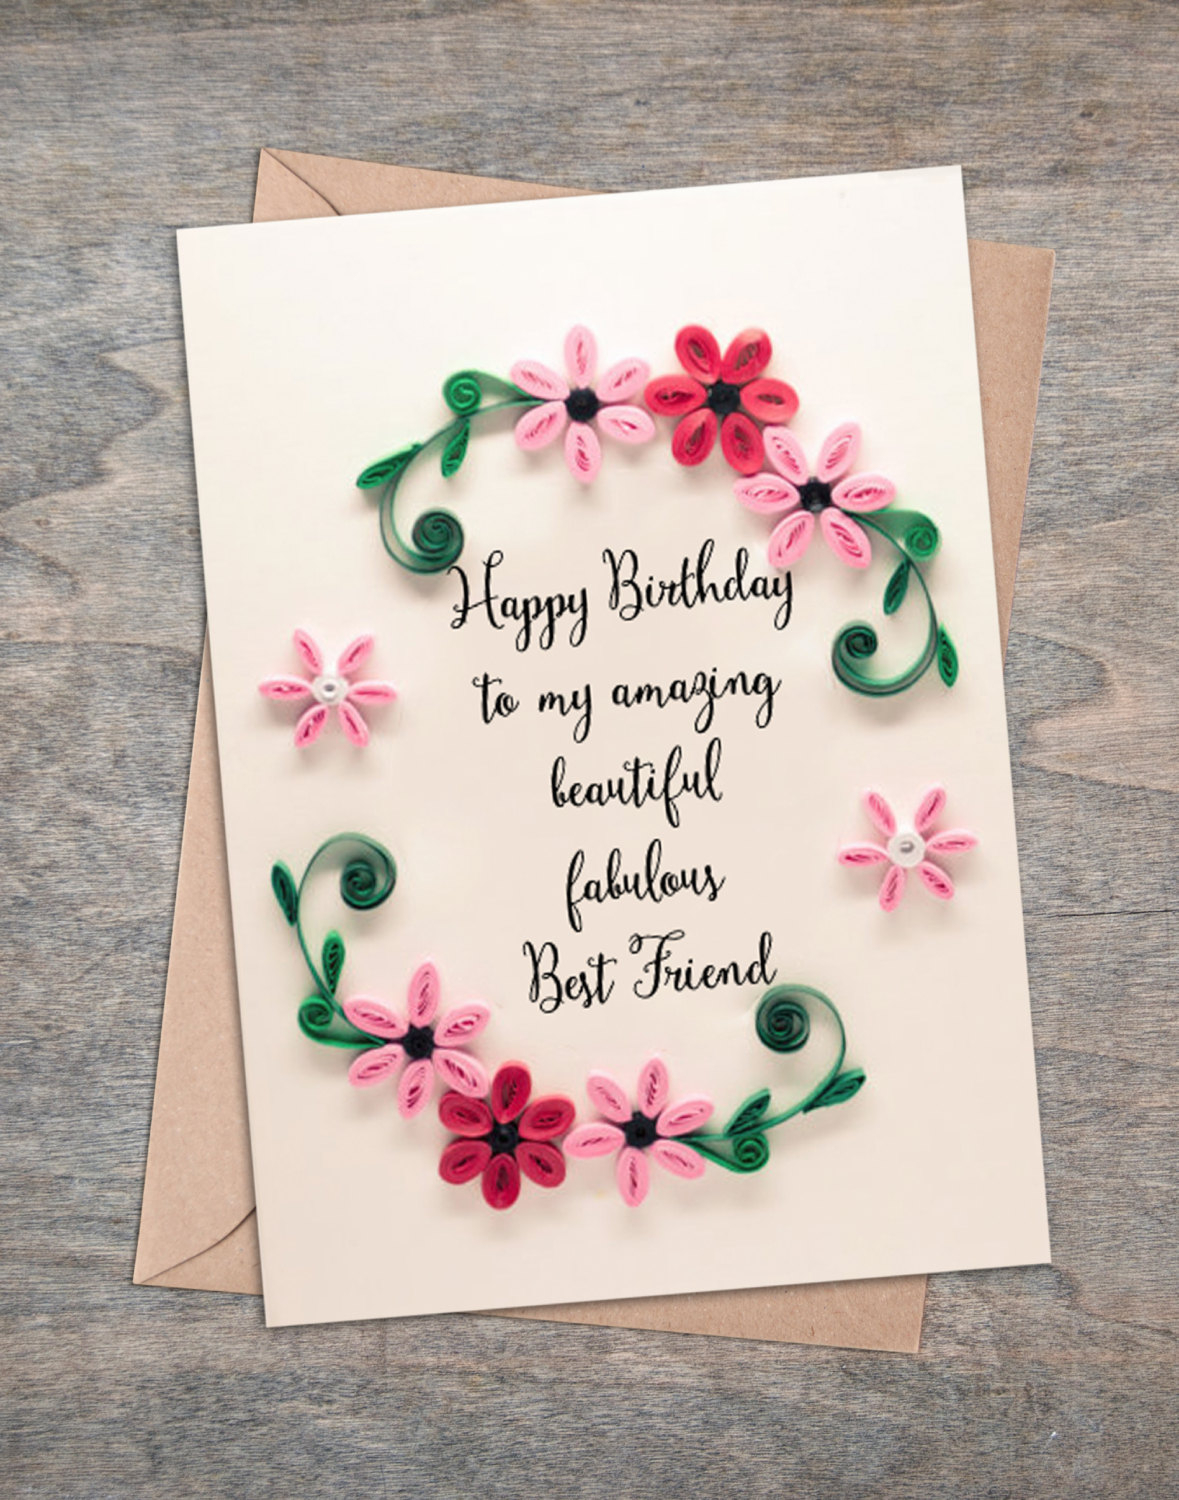 Cute Birthday Card Ideas For Friend Cute Birthday Card Ideas For Aunt Messages An Printable What To